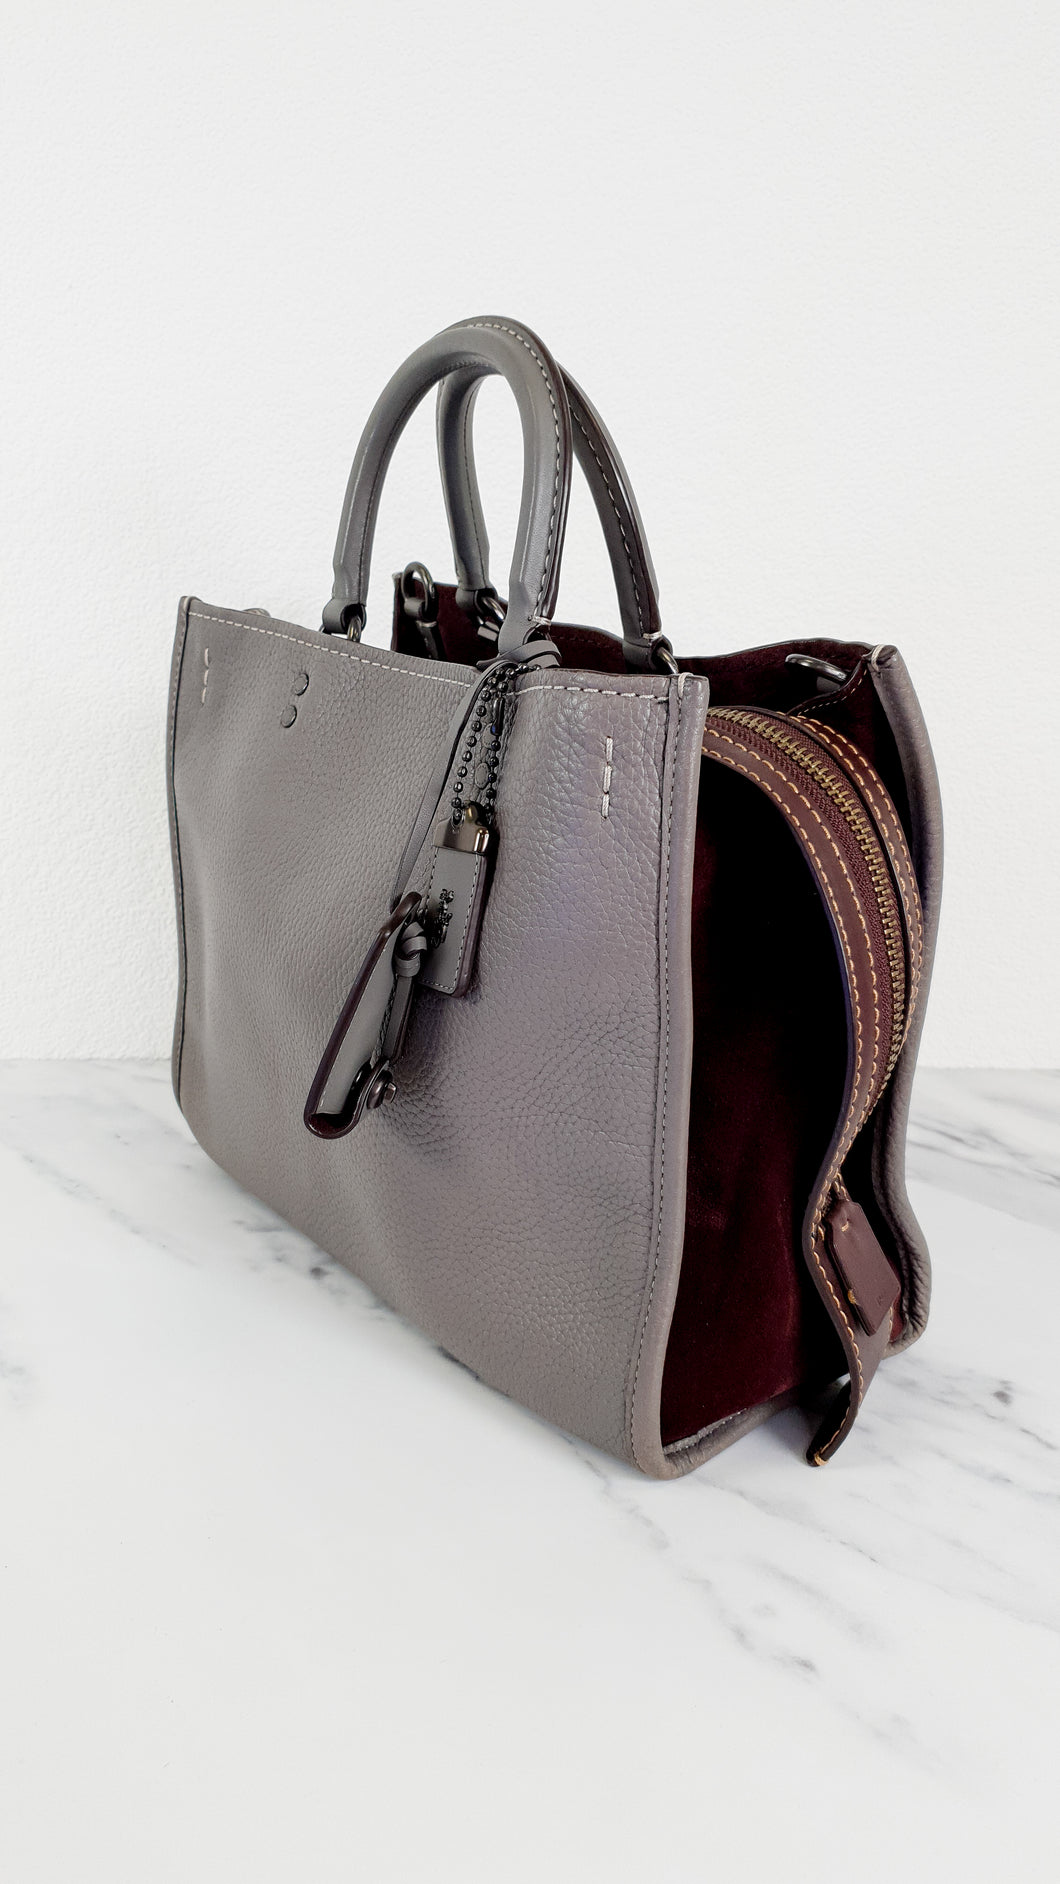 Coach 1941 Rogue 31 in Heather Grey Pebbled Leather with Oxblood Suede Sides Colorblock - Satchel Handbag - Coach 23755